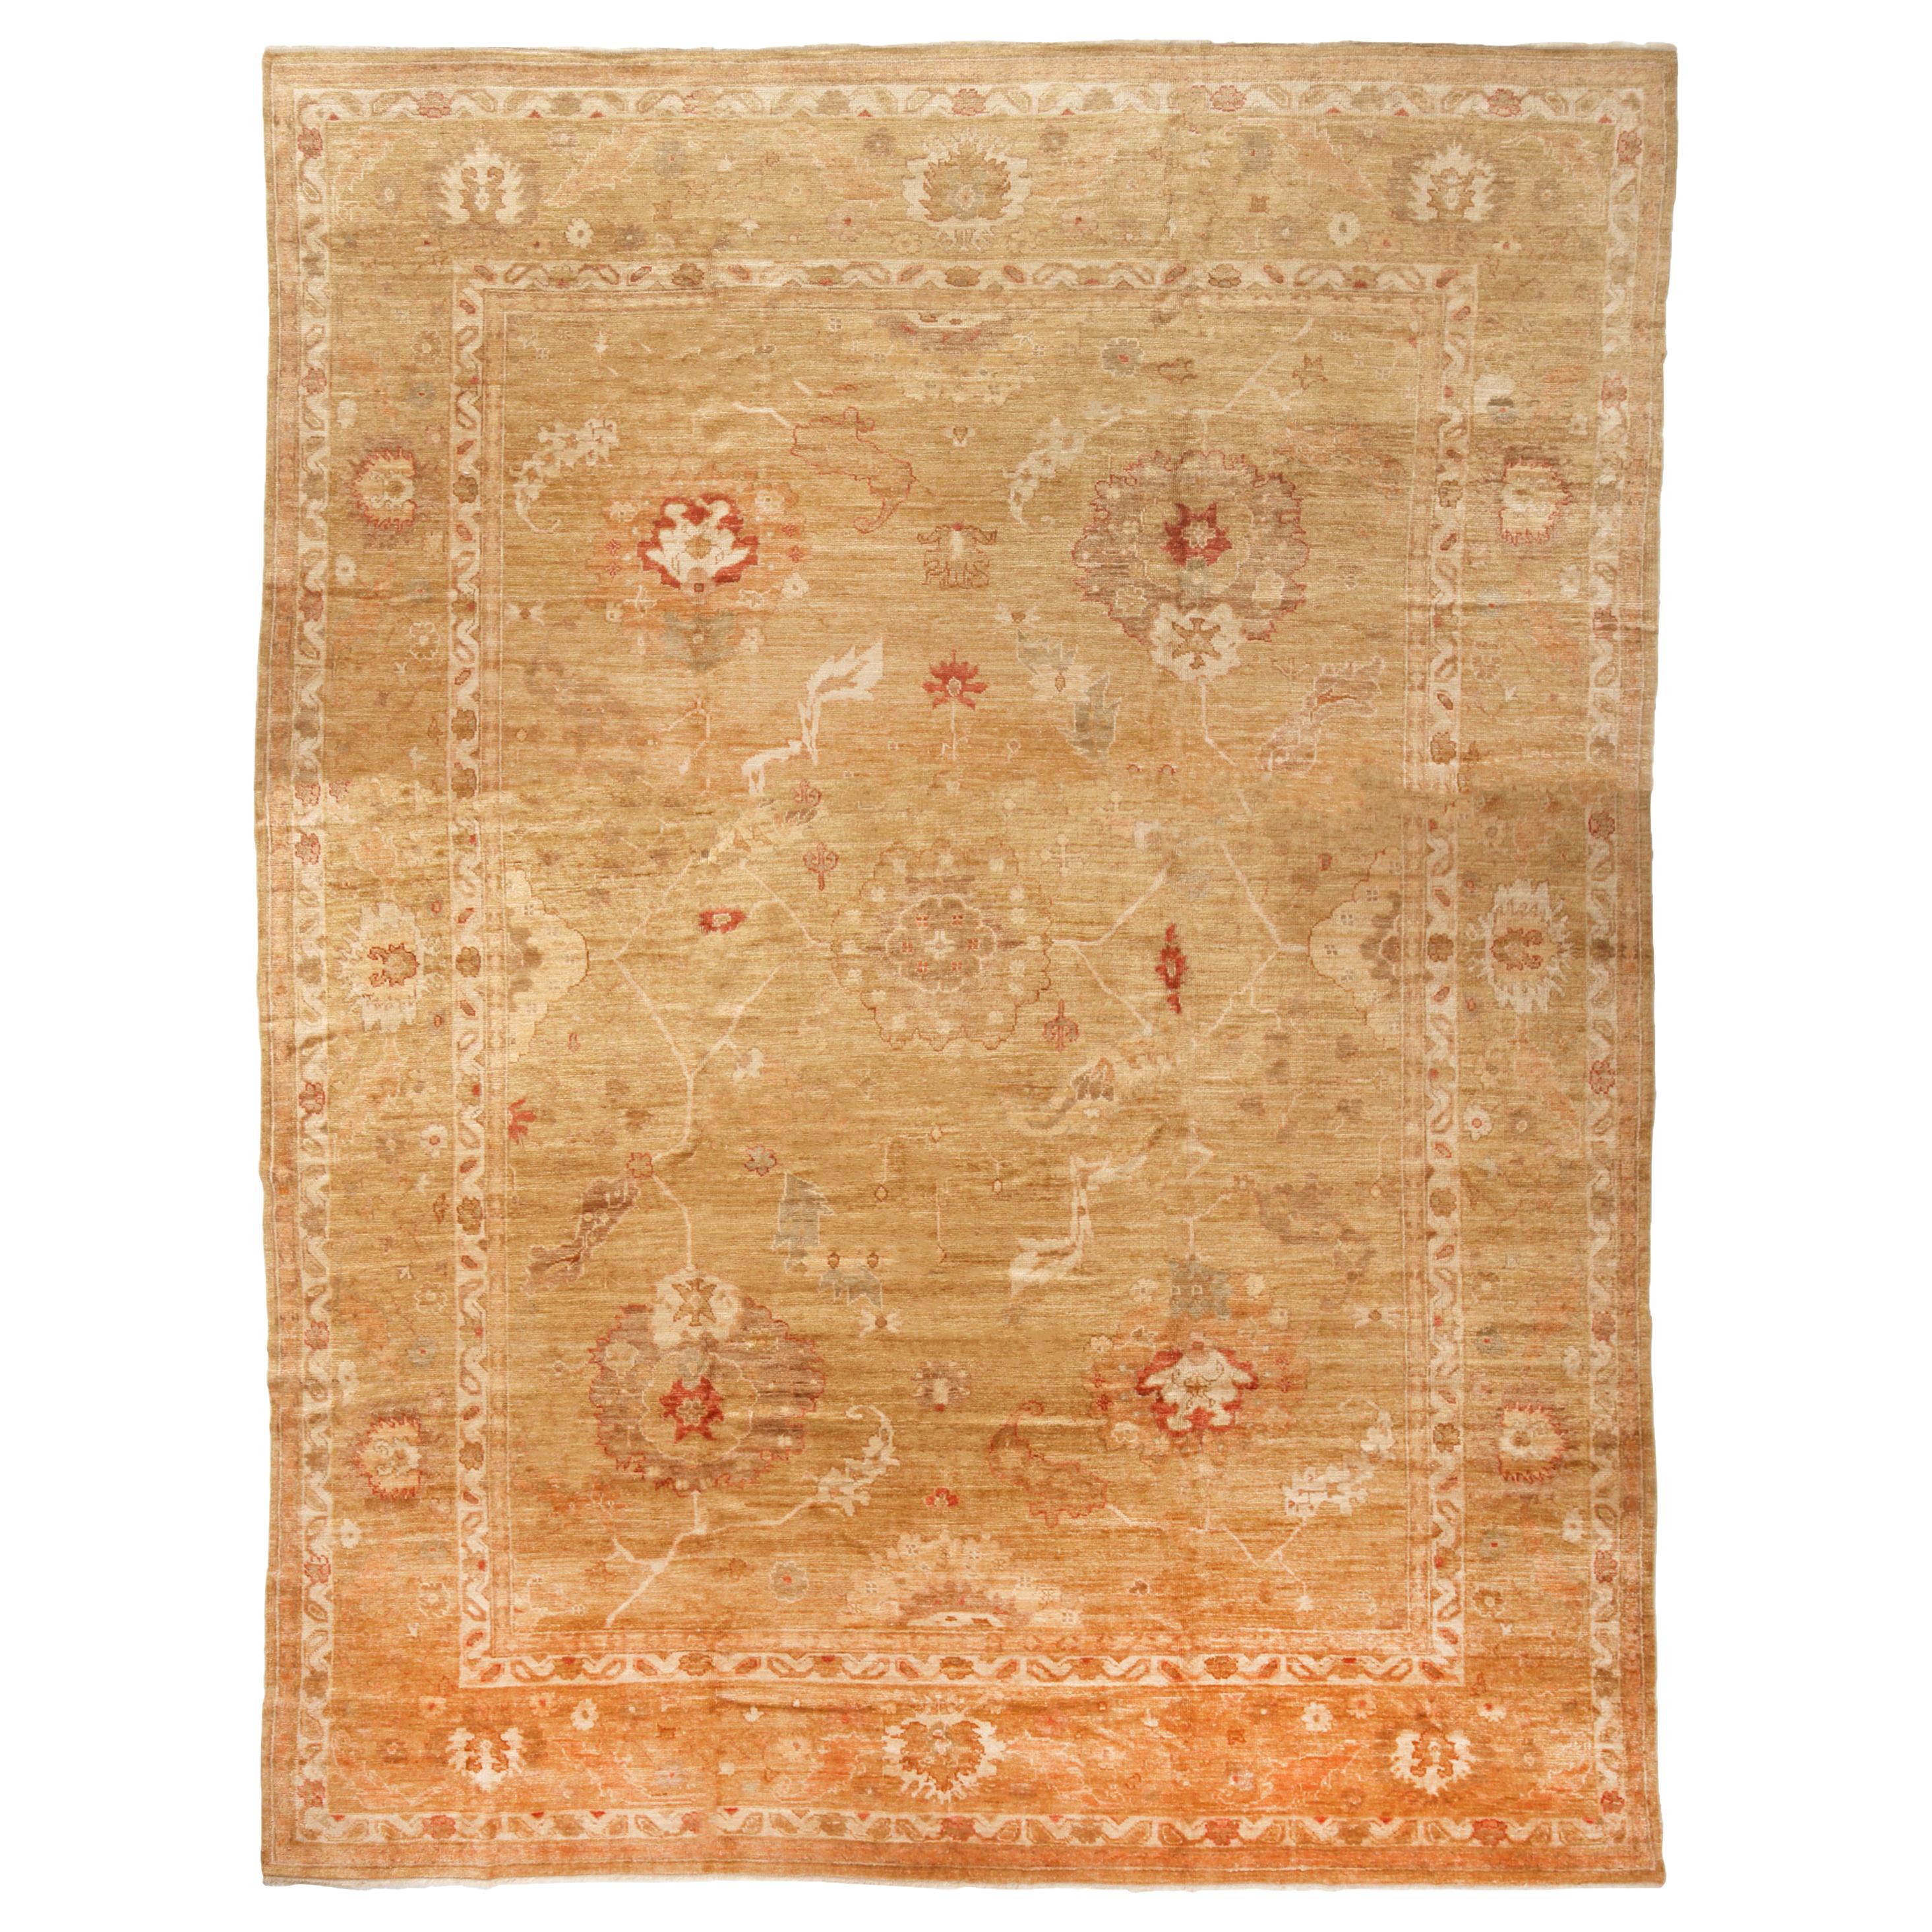 Rug & Kilim's New Oushak Design Transitional in Tan and Red Floral Rug